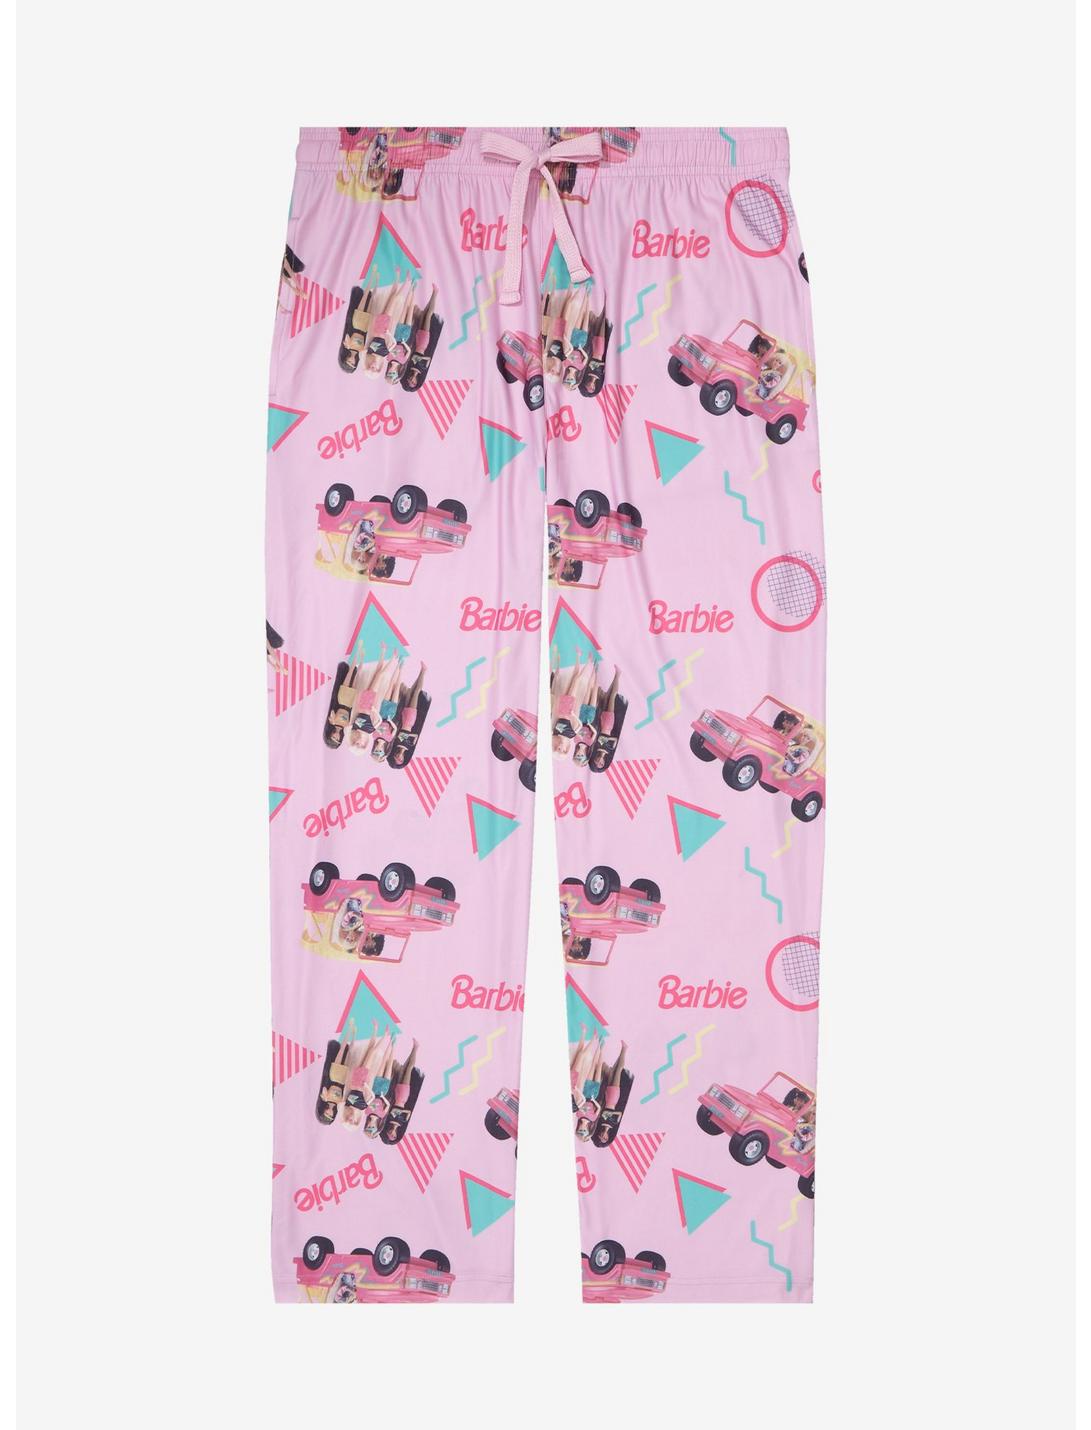 Barbie Jeep Allover Print Plus Size Sleep Pants - BoxLunch Exclusive, PINK, hi-res